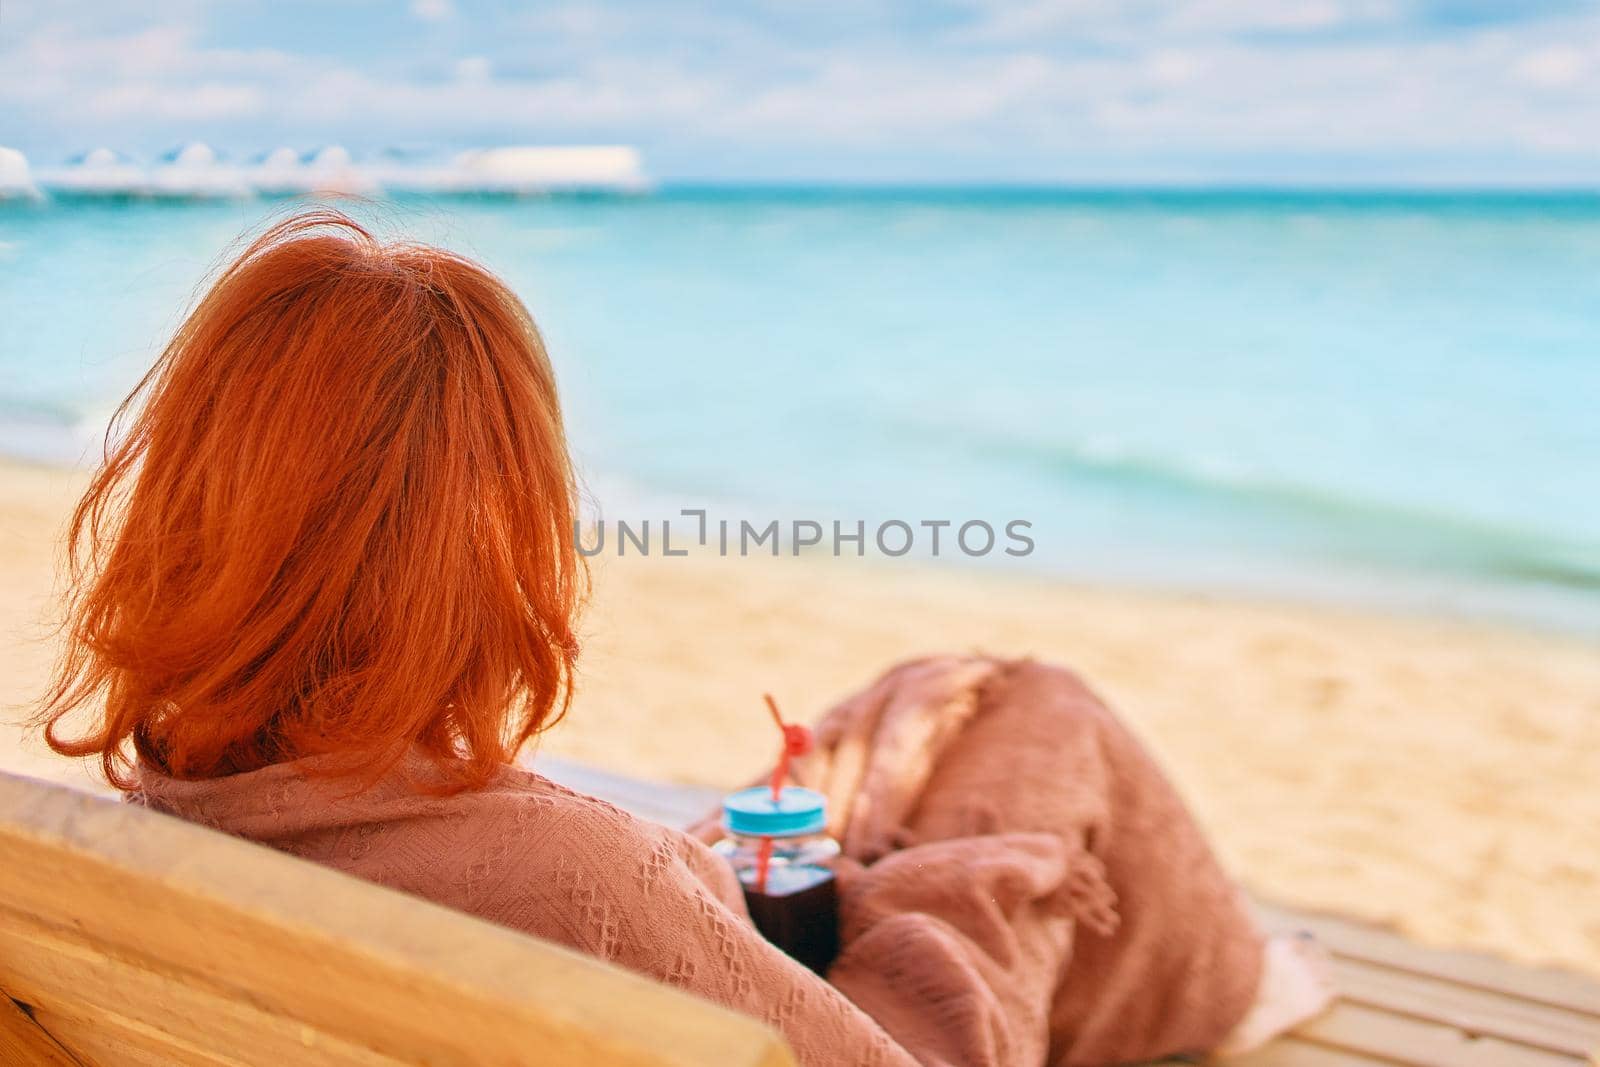 Woman is resting on the sea beach and admiring the ocean landscape. Red-haired girl from behind is lying on chaise longue covered with a blanket. Alcoholic drink in female's hands. Summer holidays.